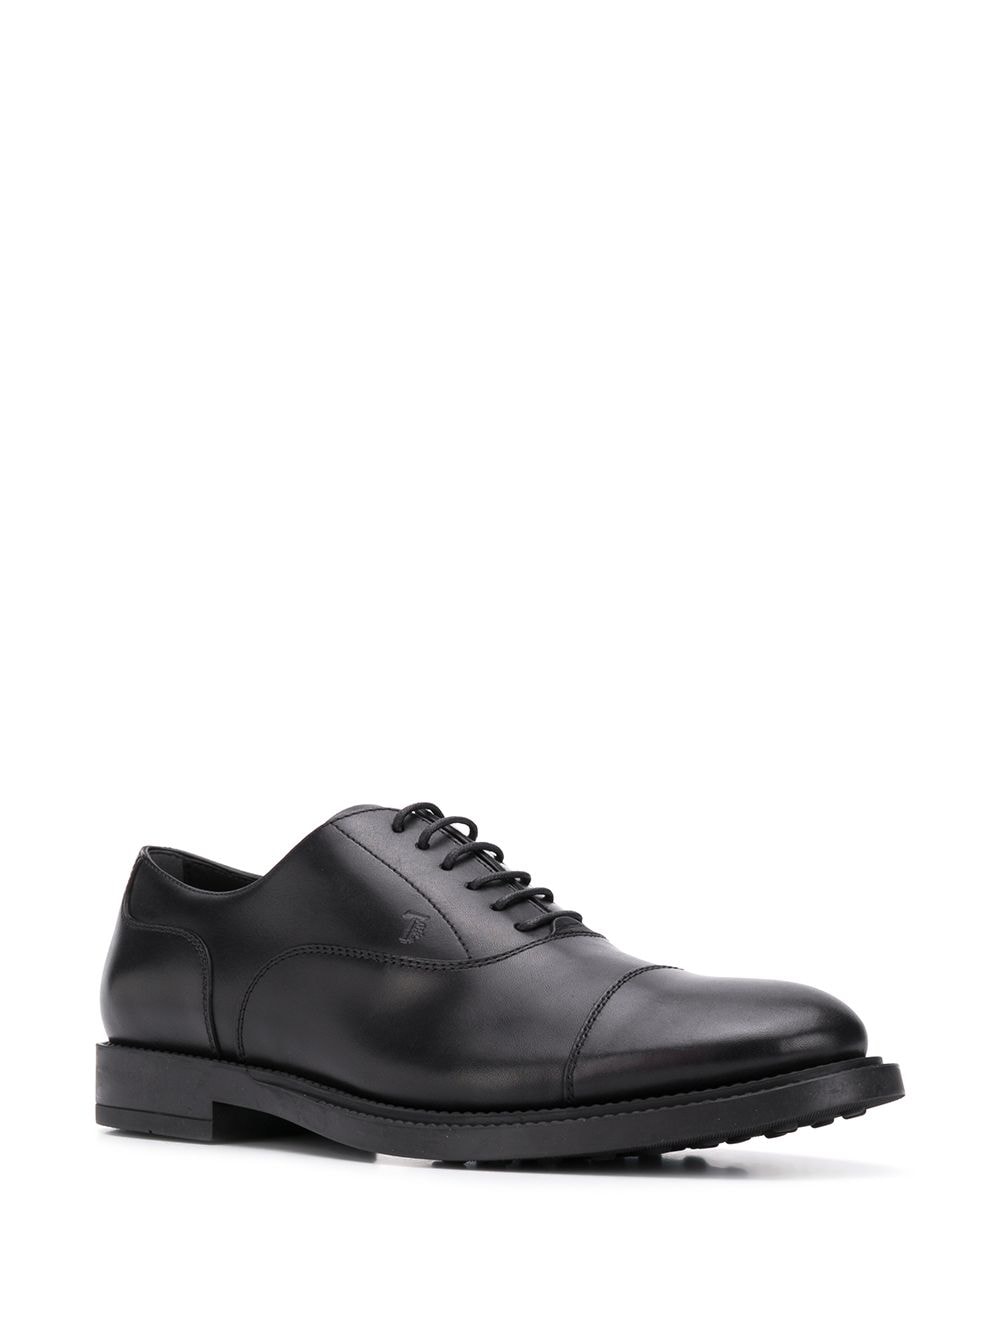 Image 2 of Tod's leather Oxford shoes